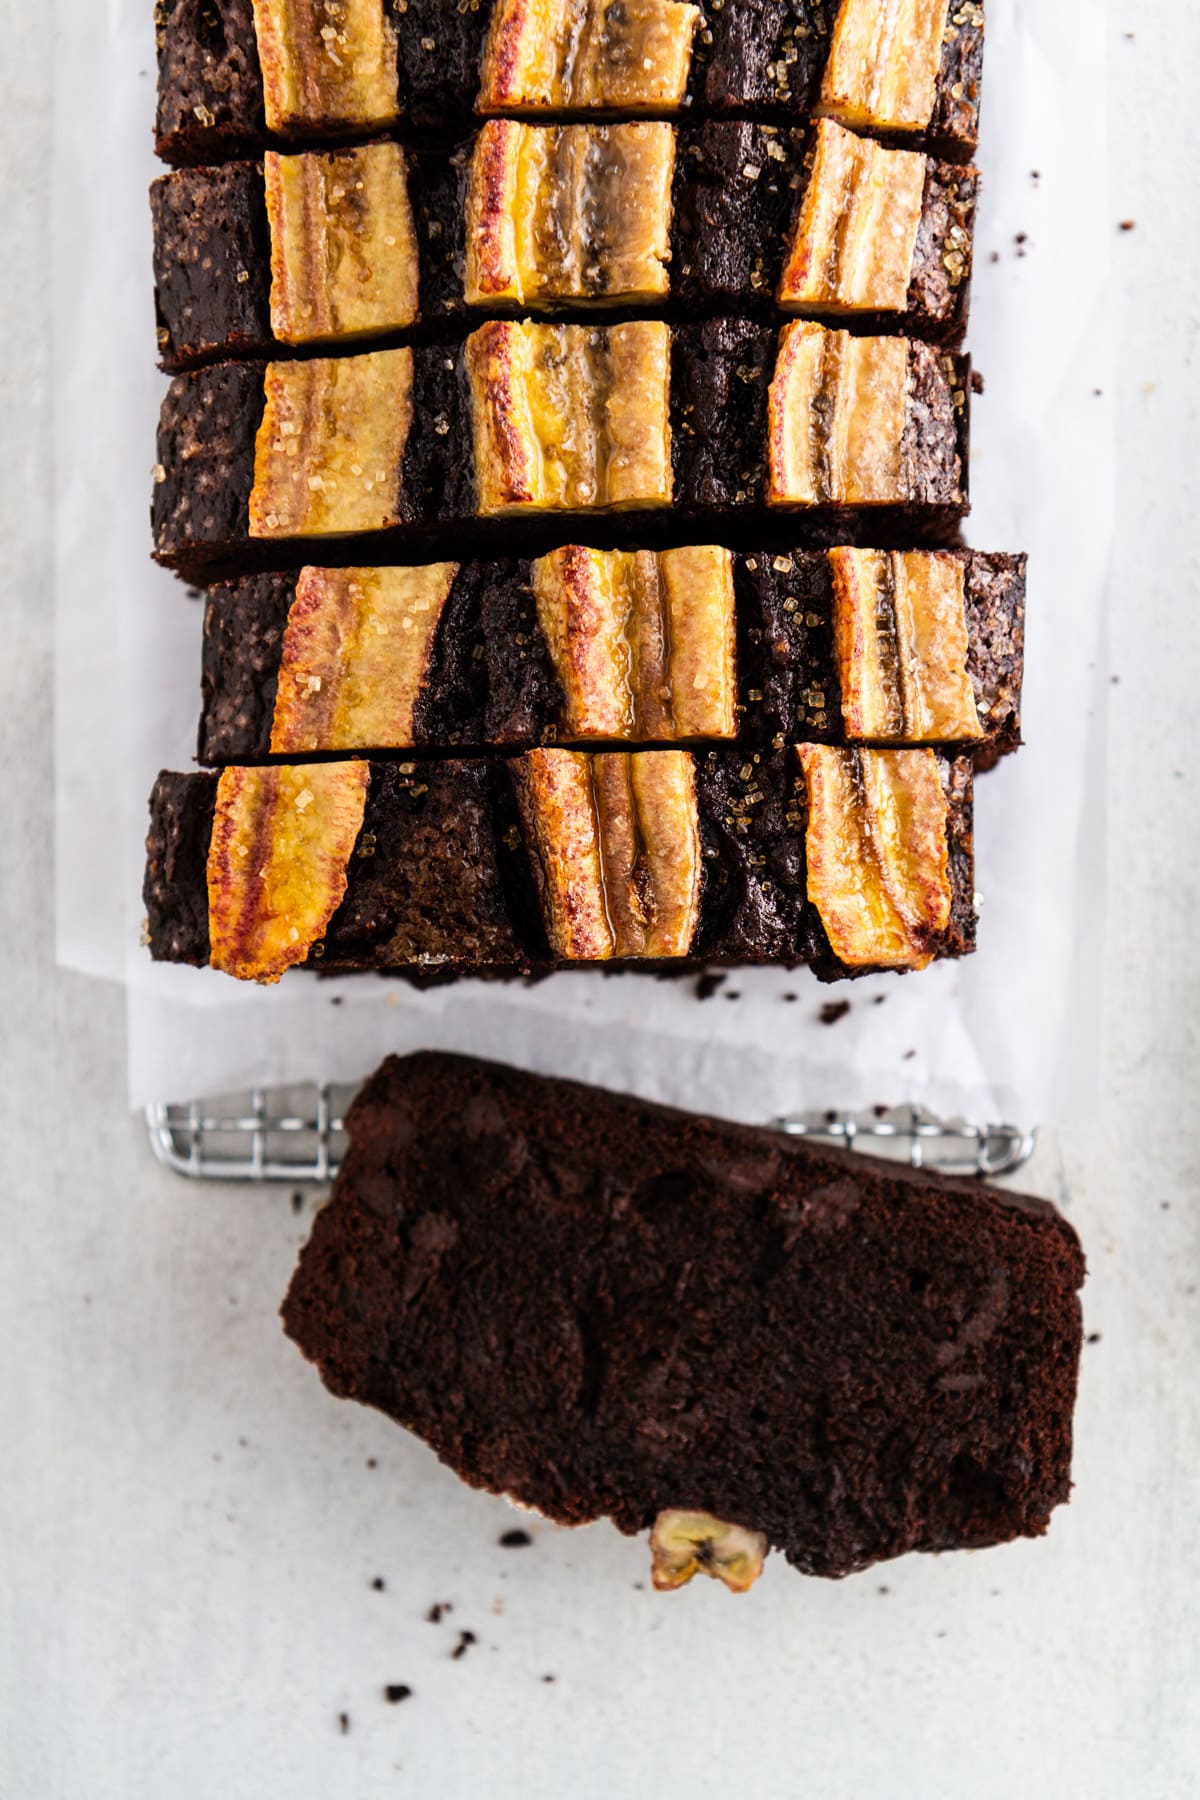 a slice of chocolate banana bread on its side